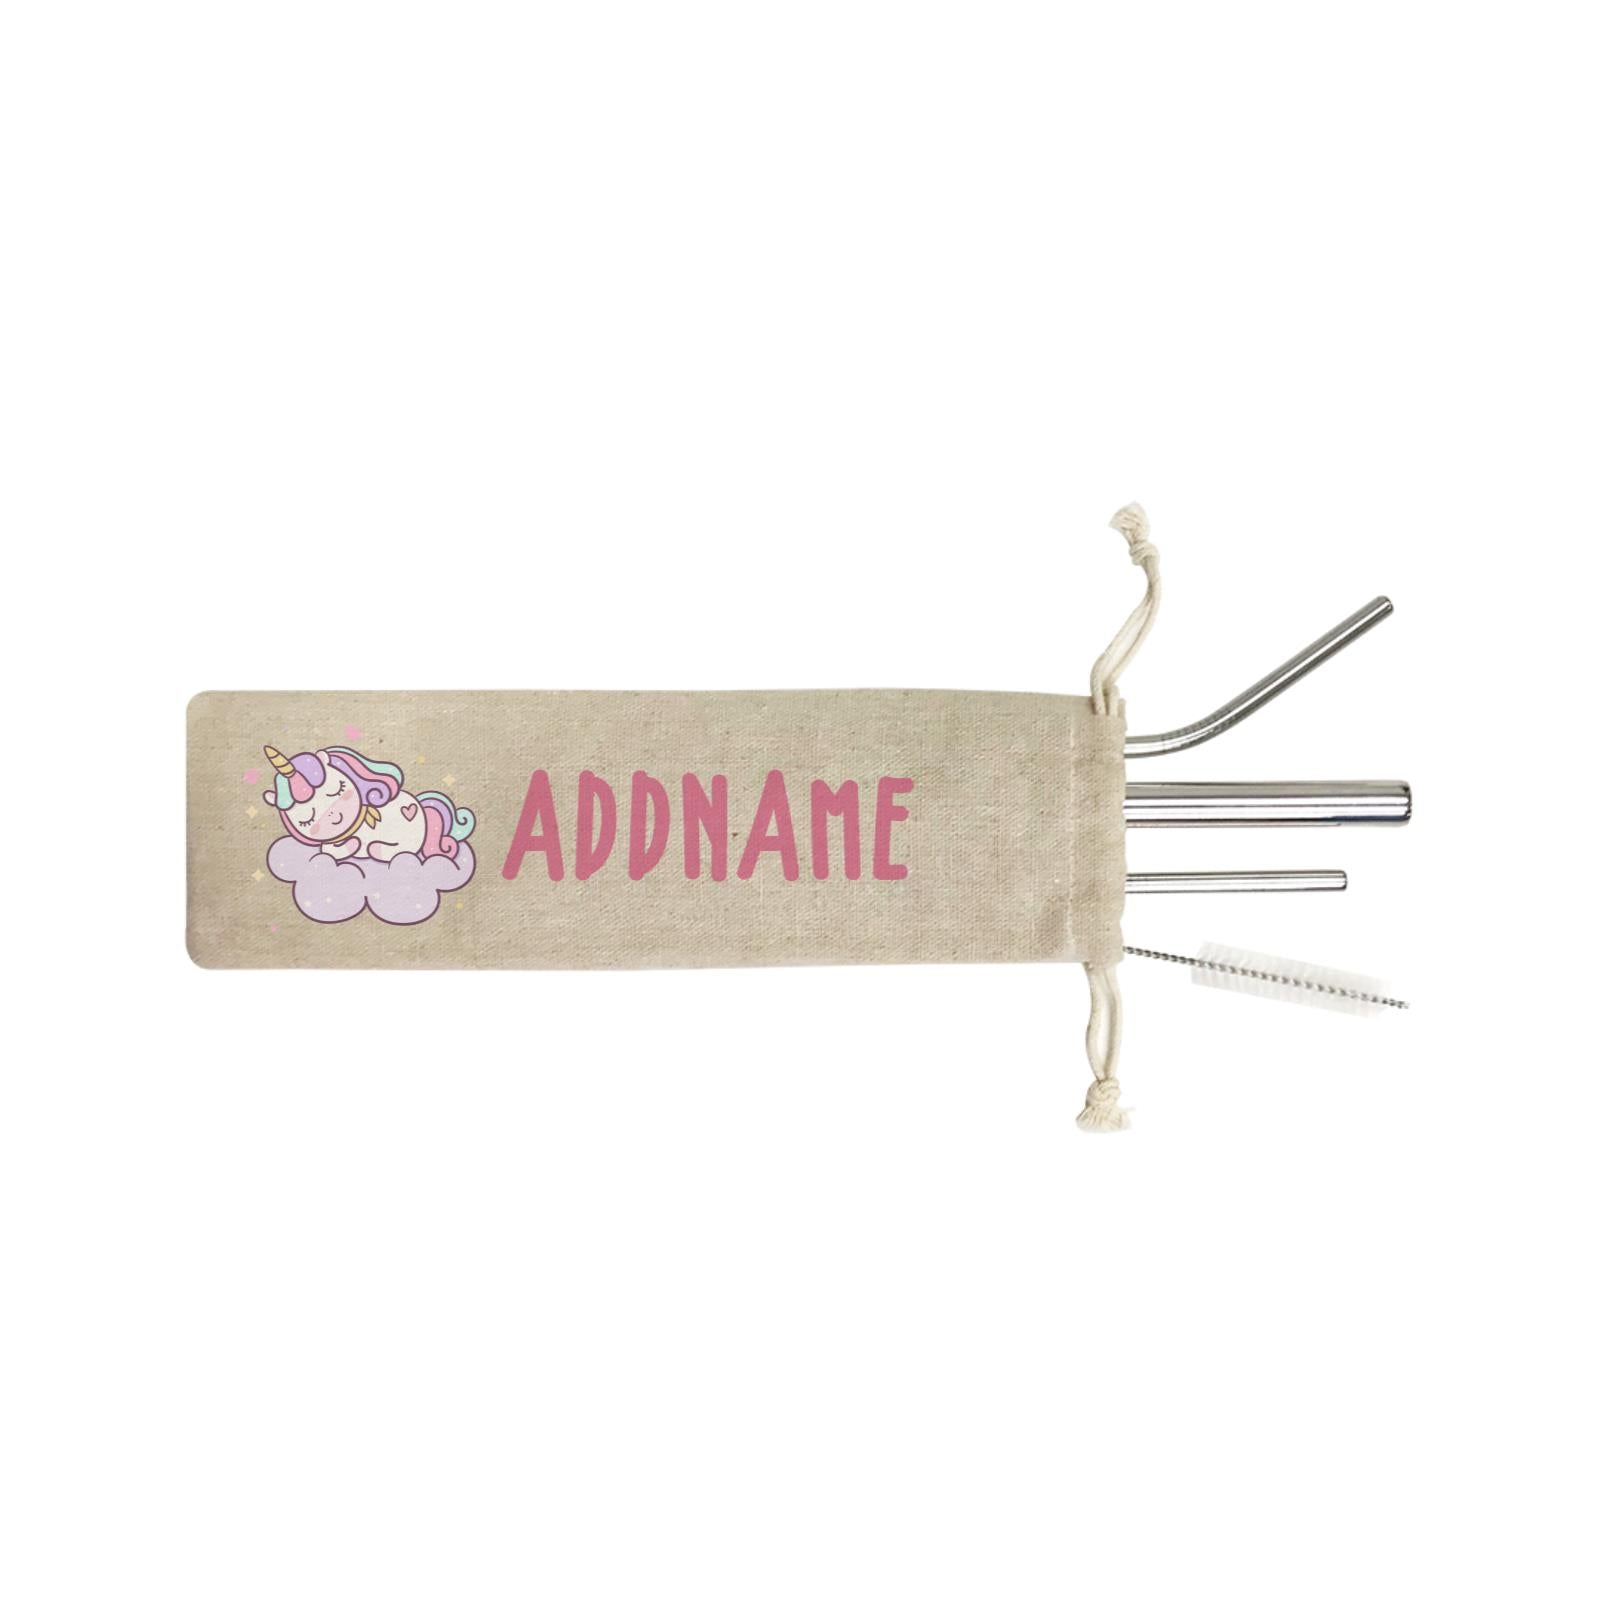 Unicorn And Princess Series Cute Pastel Sleeping Unicorn On a Cloud Addname SB 4-In-1 Stainless Steel Straw Set in Satchel